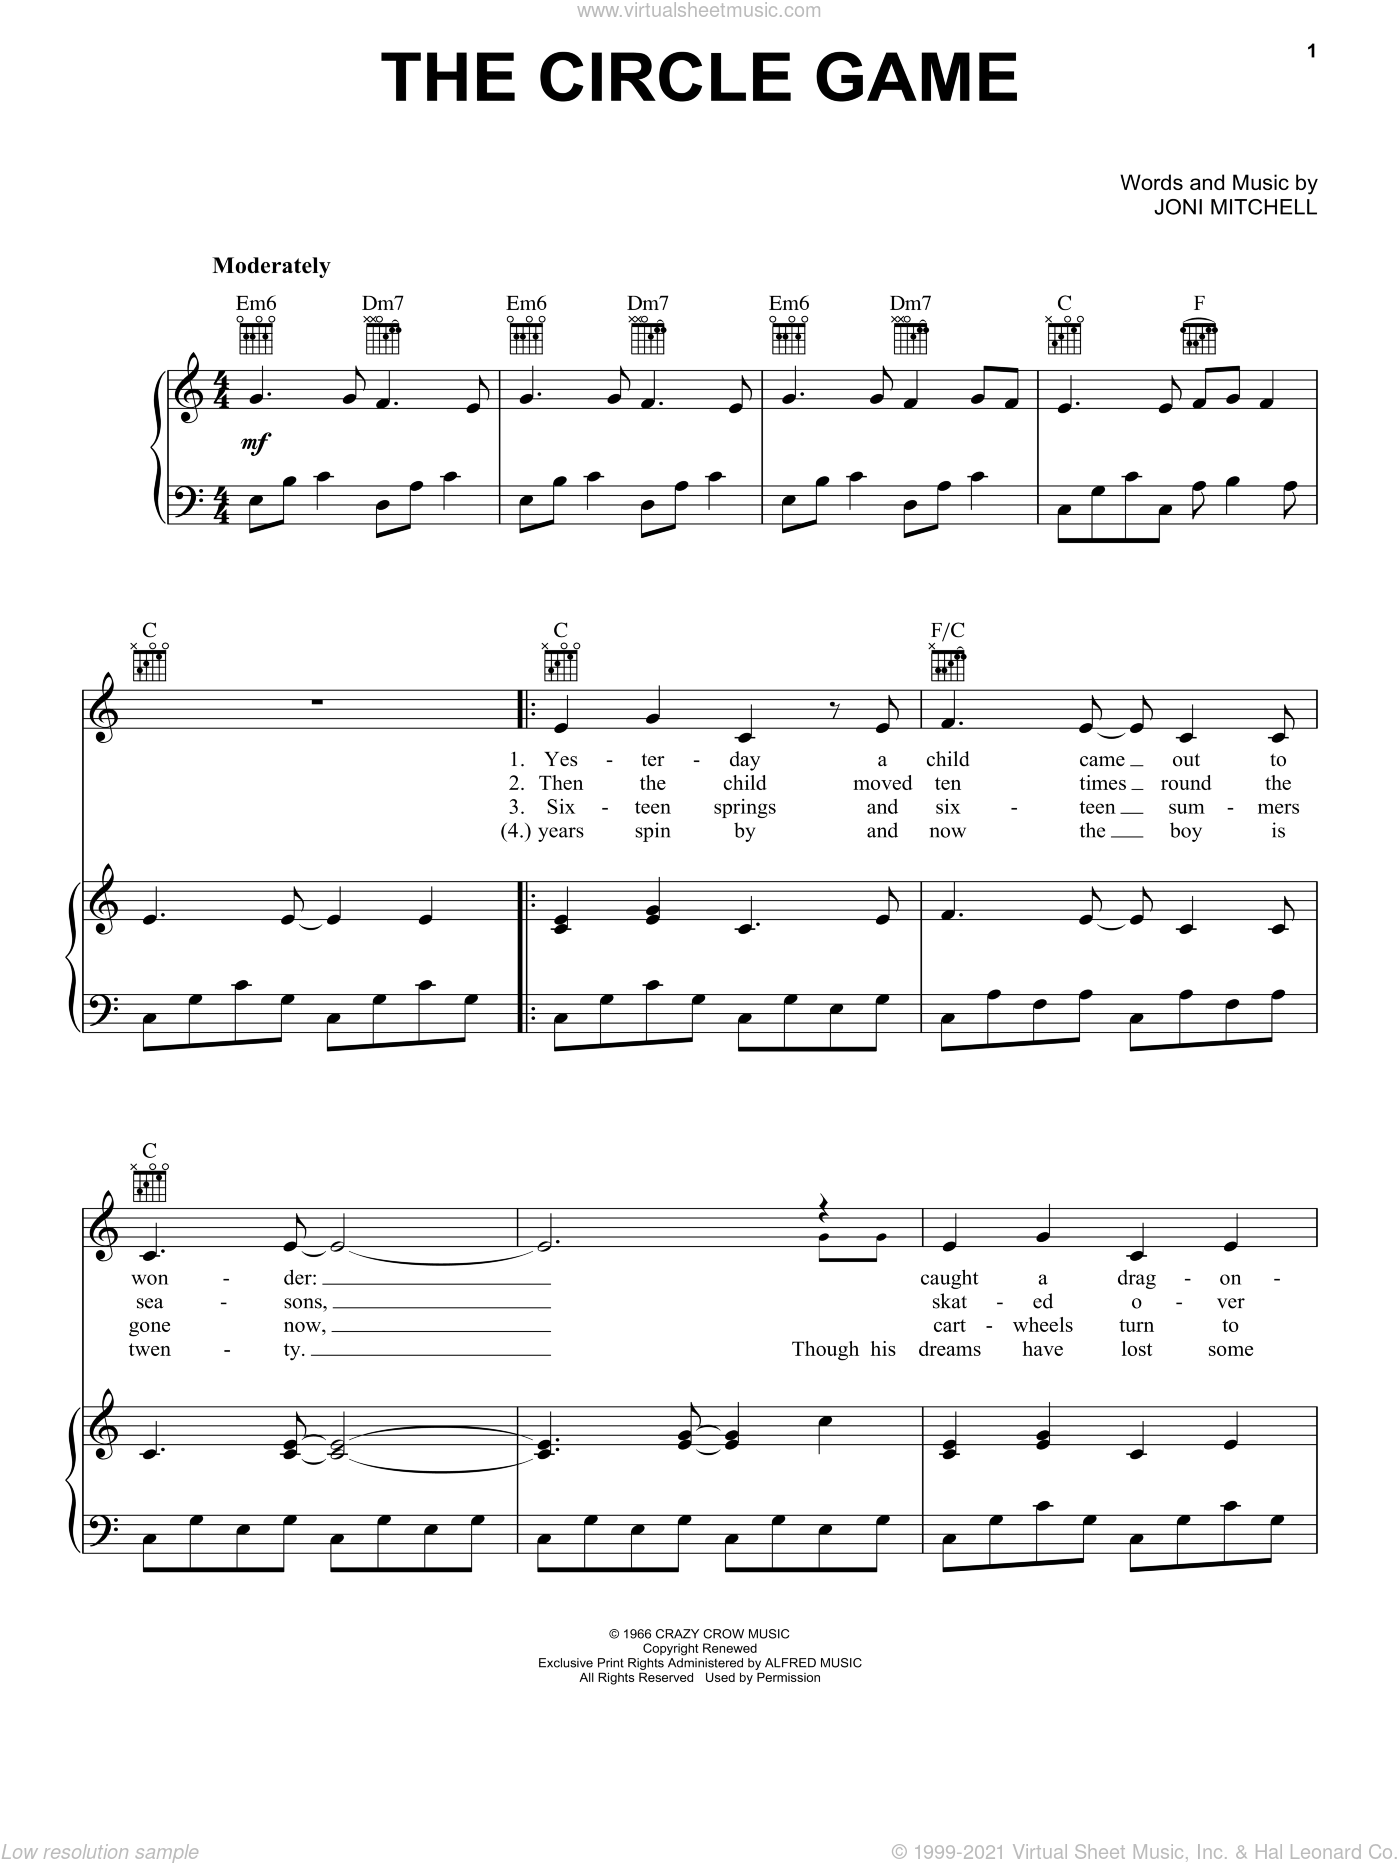 The Circle Game sheet music for piano or guitar